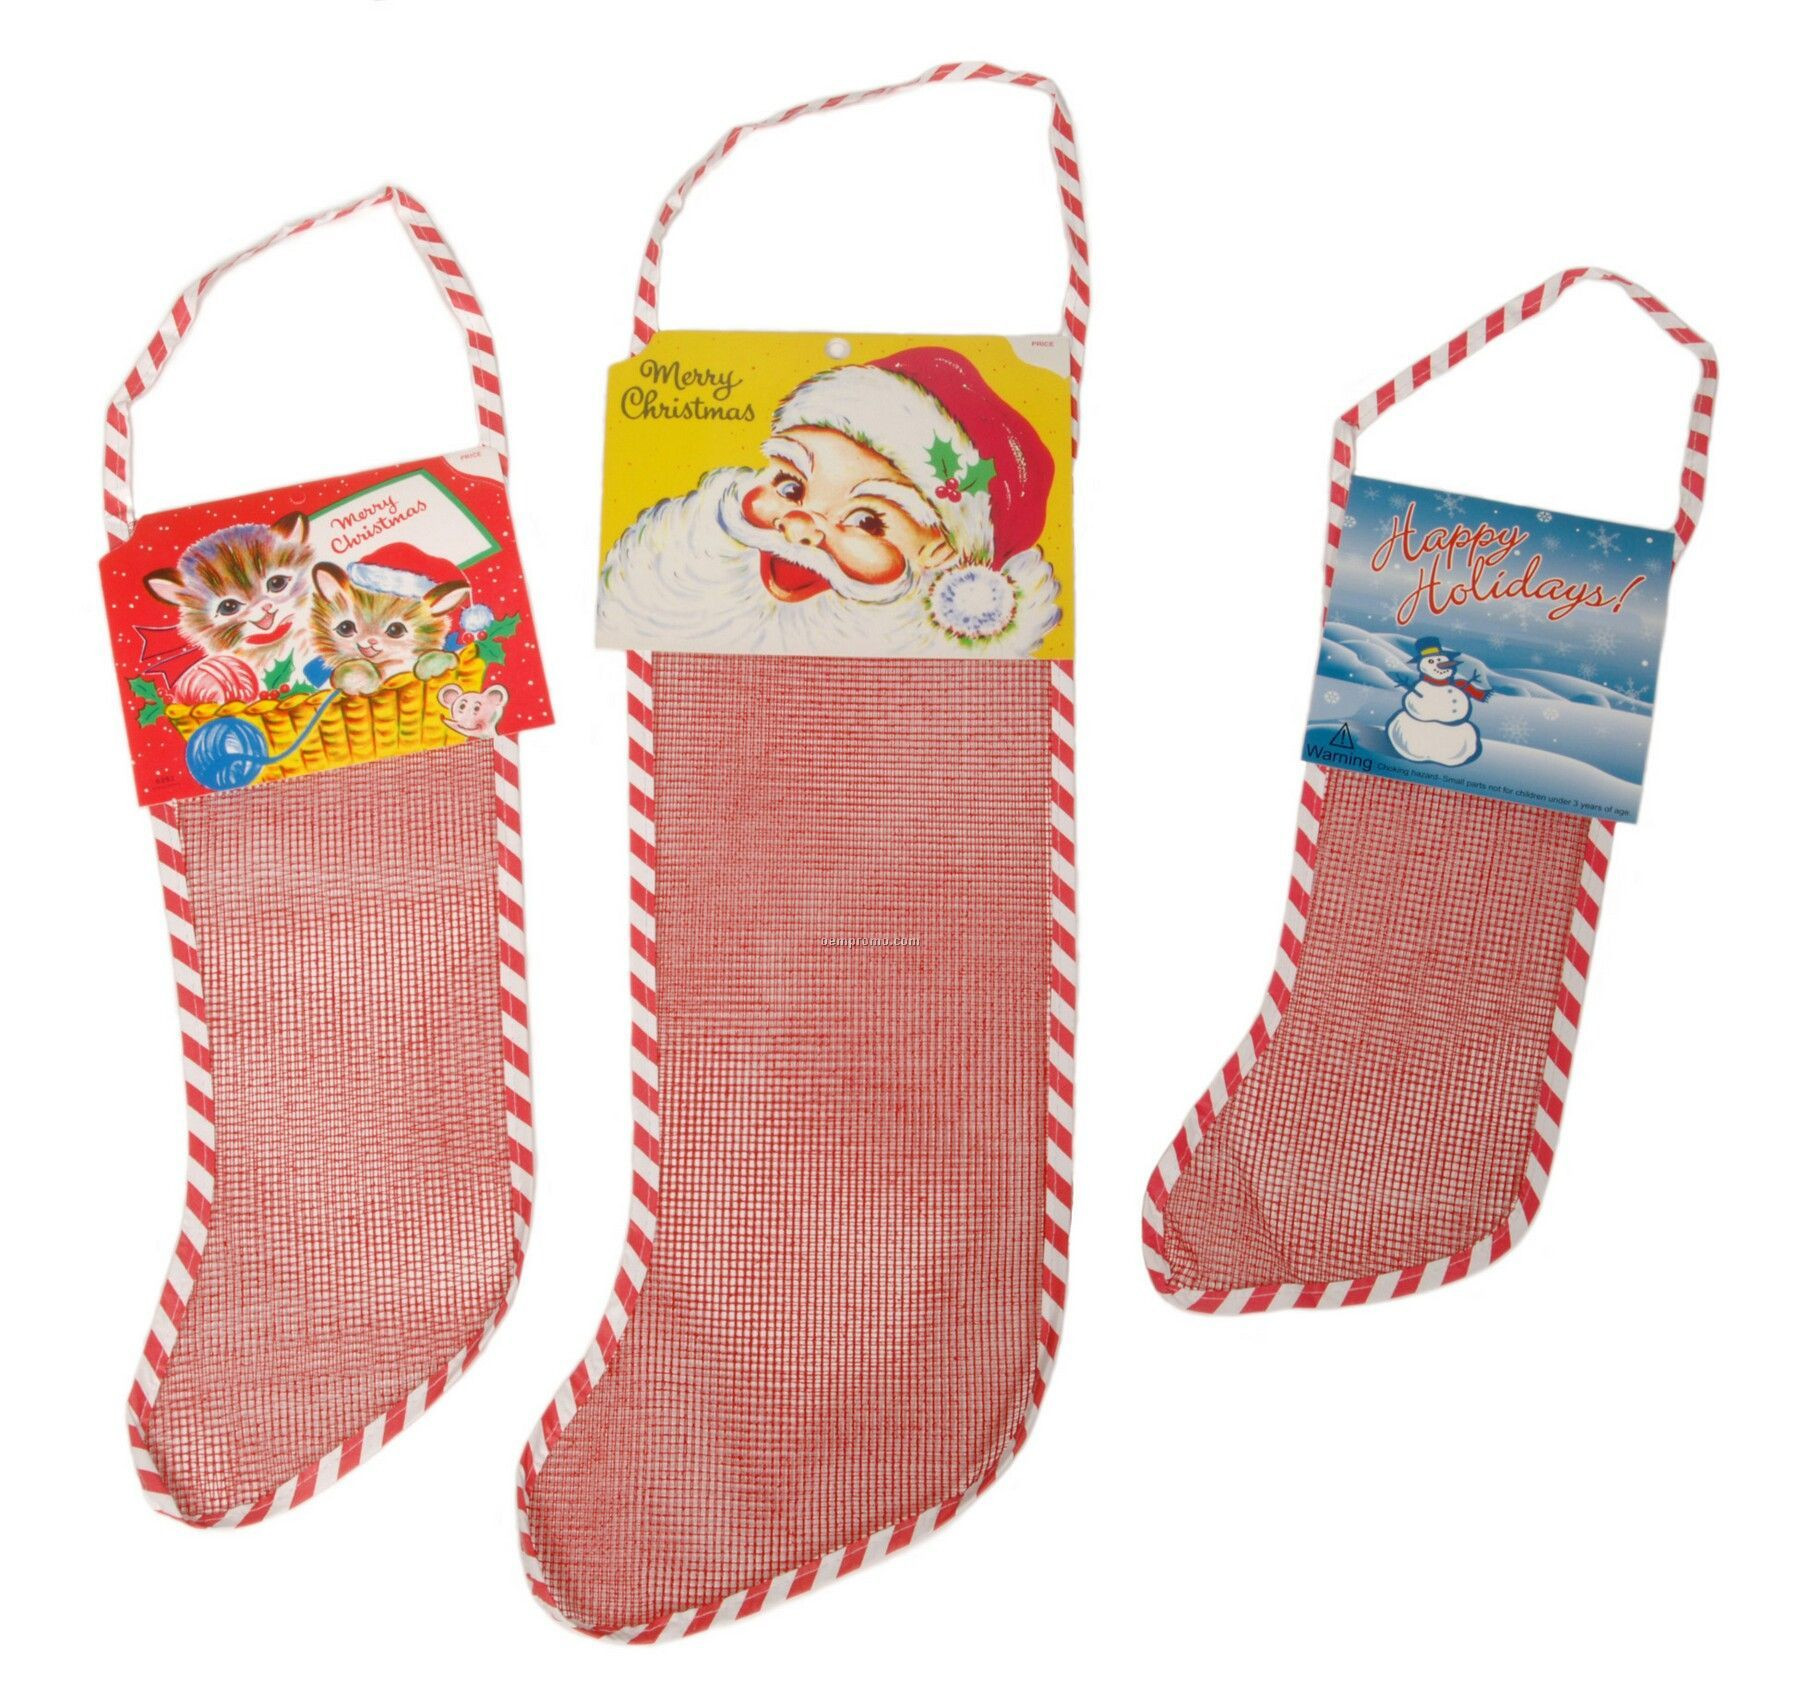 Candy Filled Christmas Stockings Wholesale
 Stockings China Wholesale Stockings